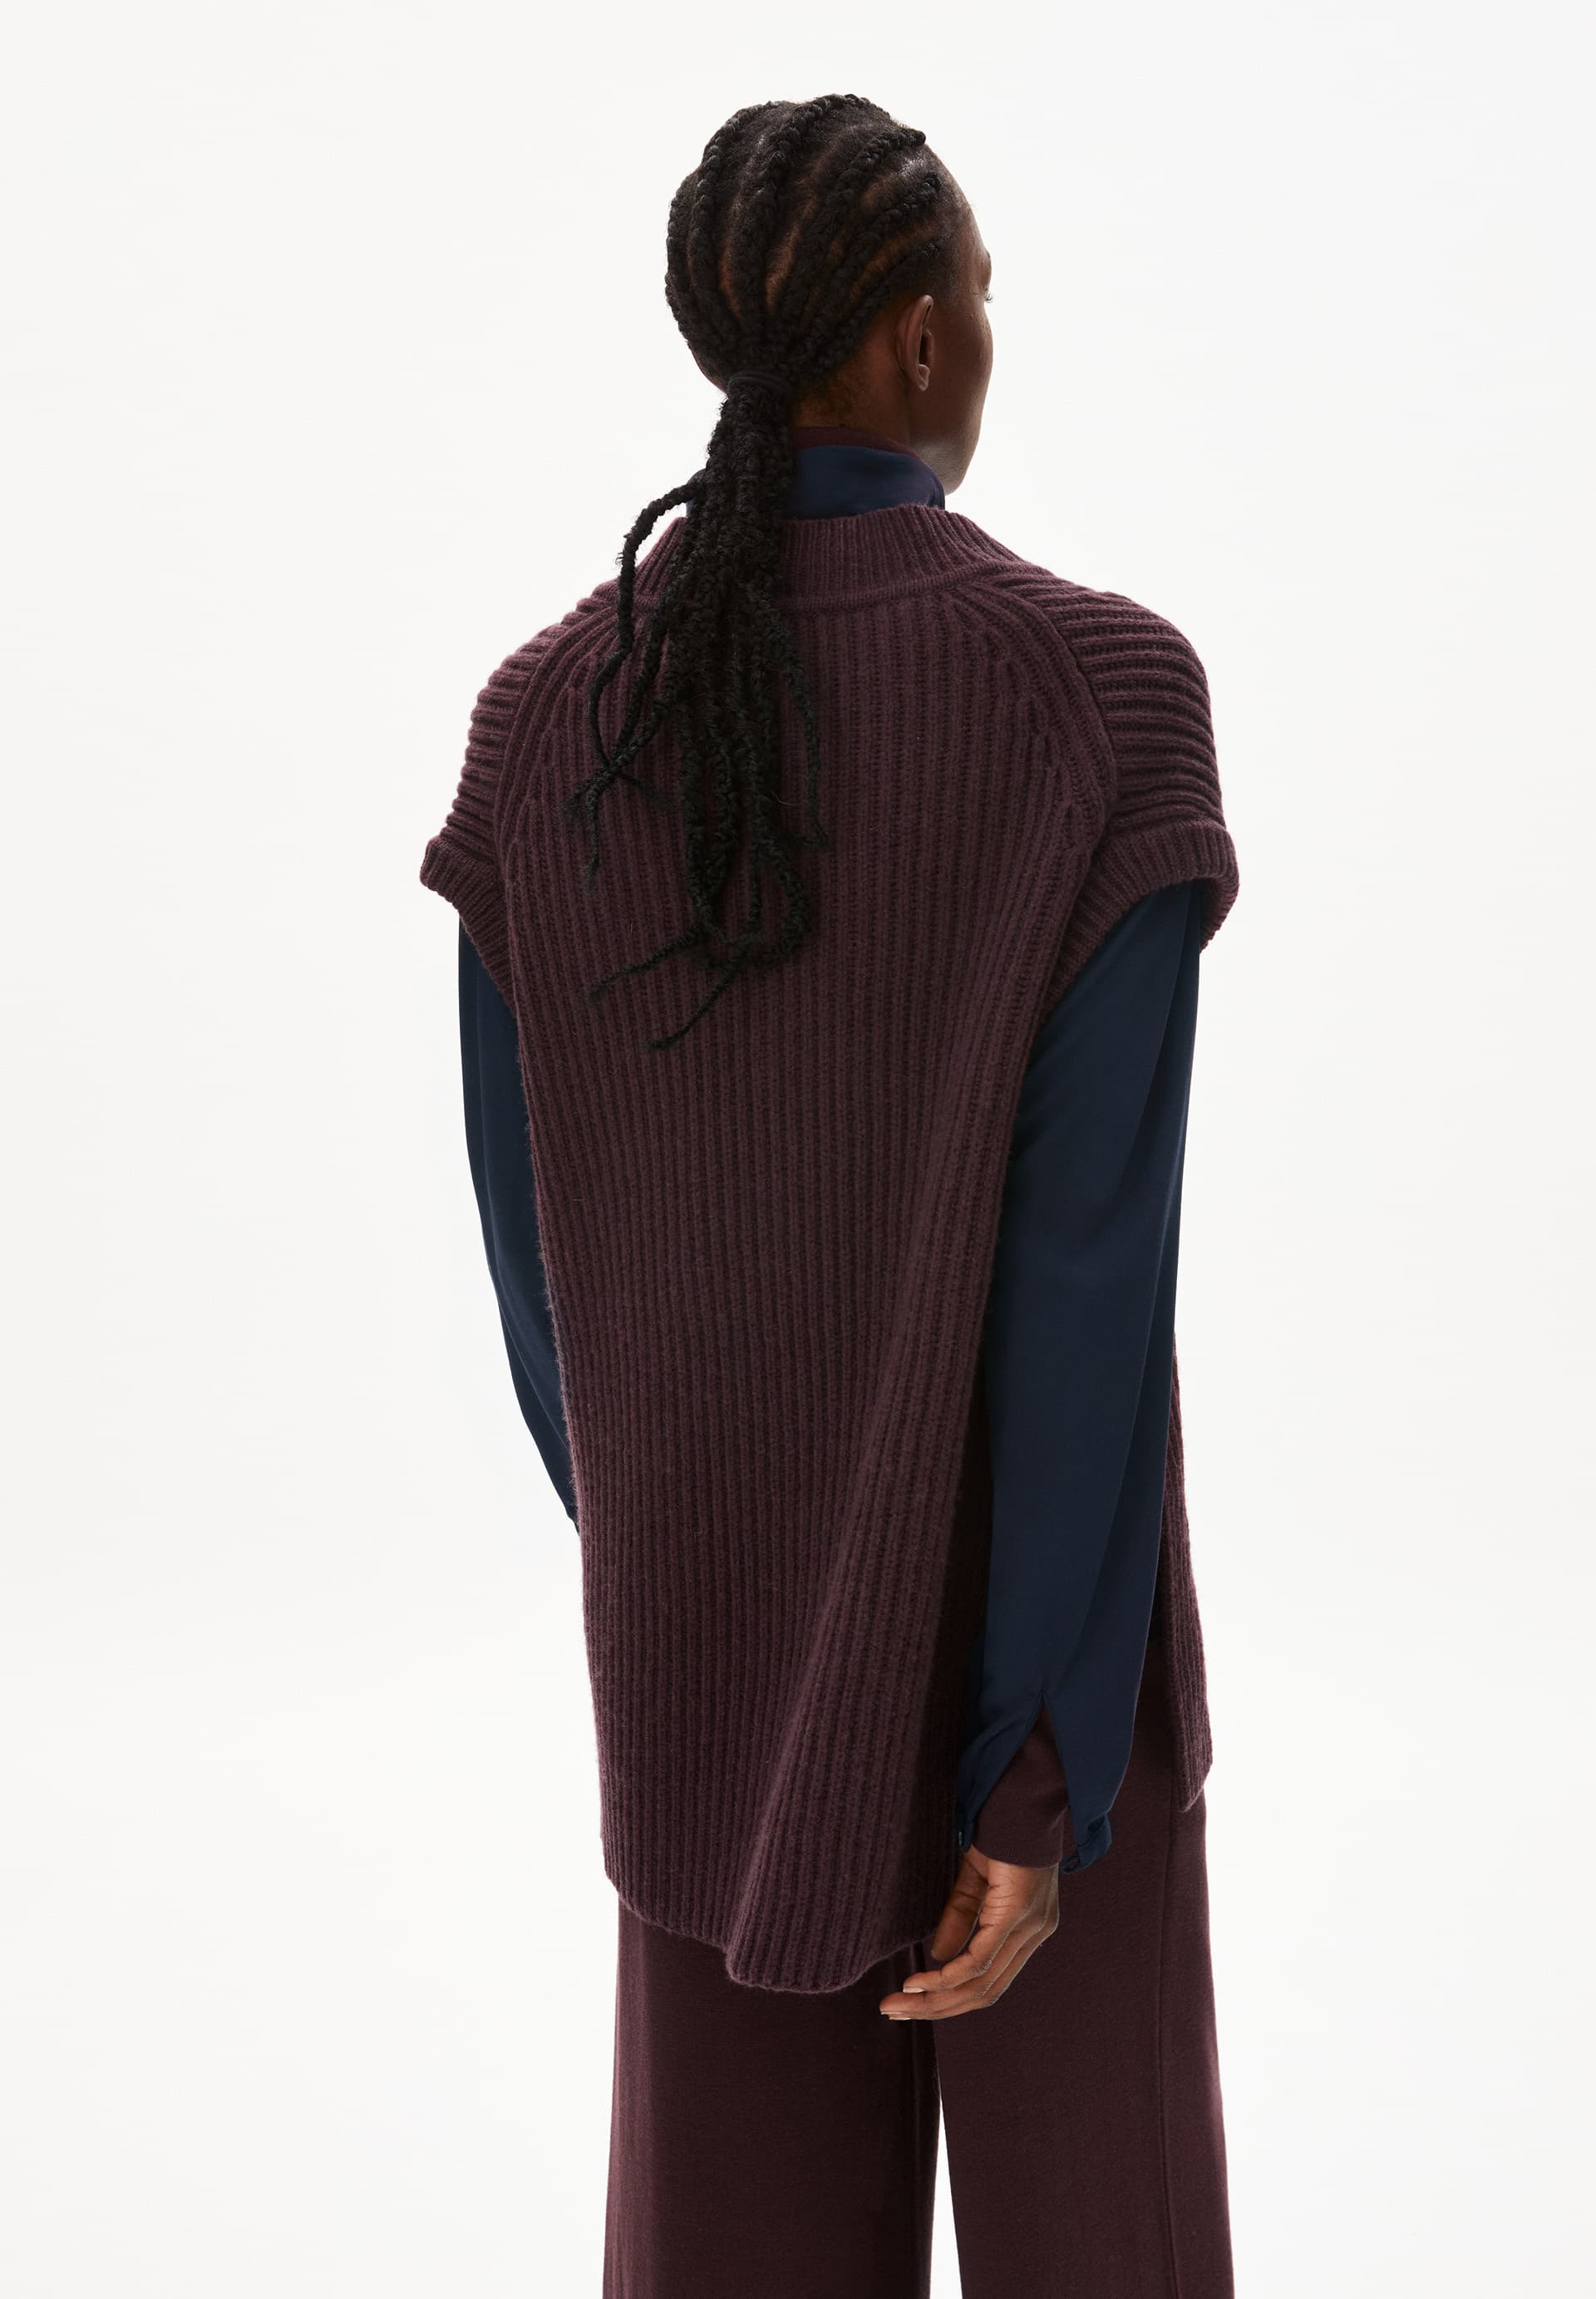 VIAA Knit Top Oversized Fit made of Organic Wool Mix